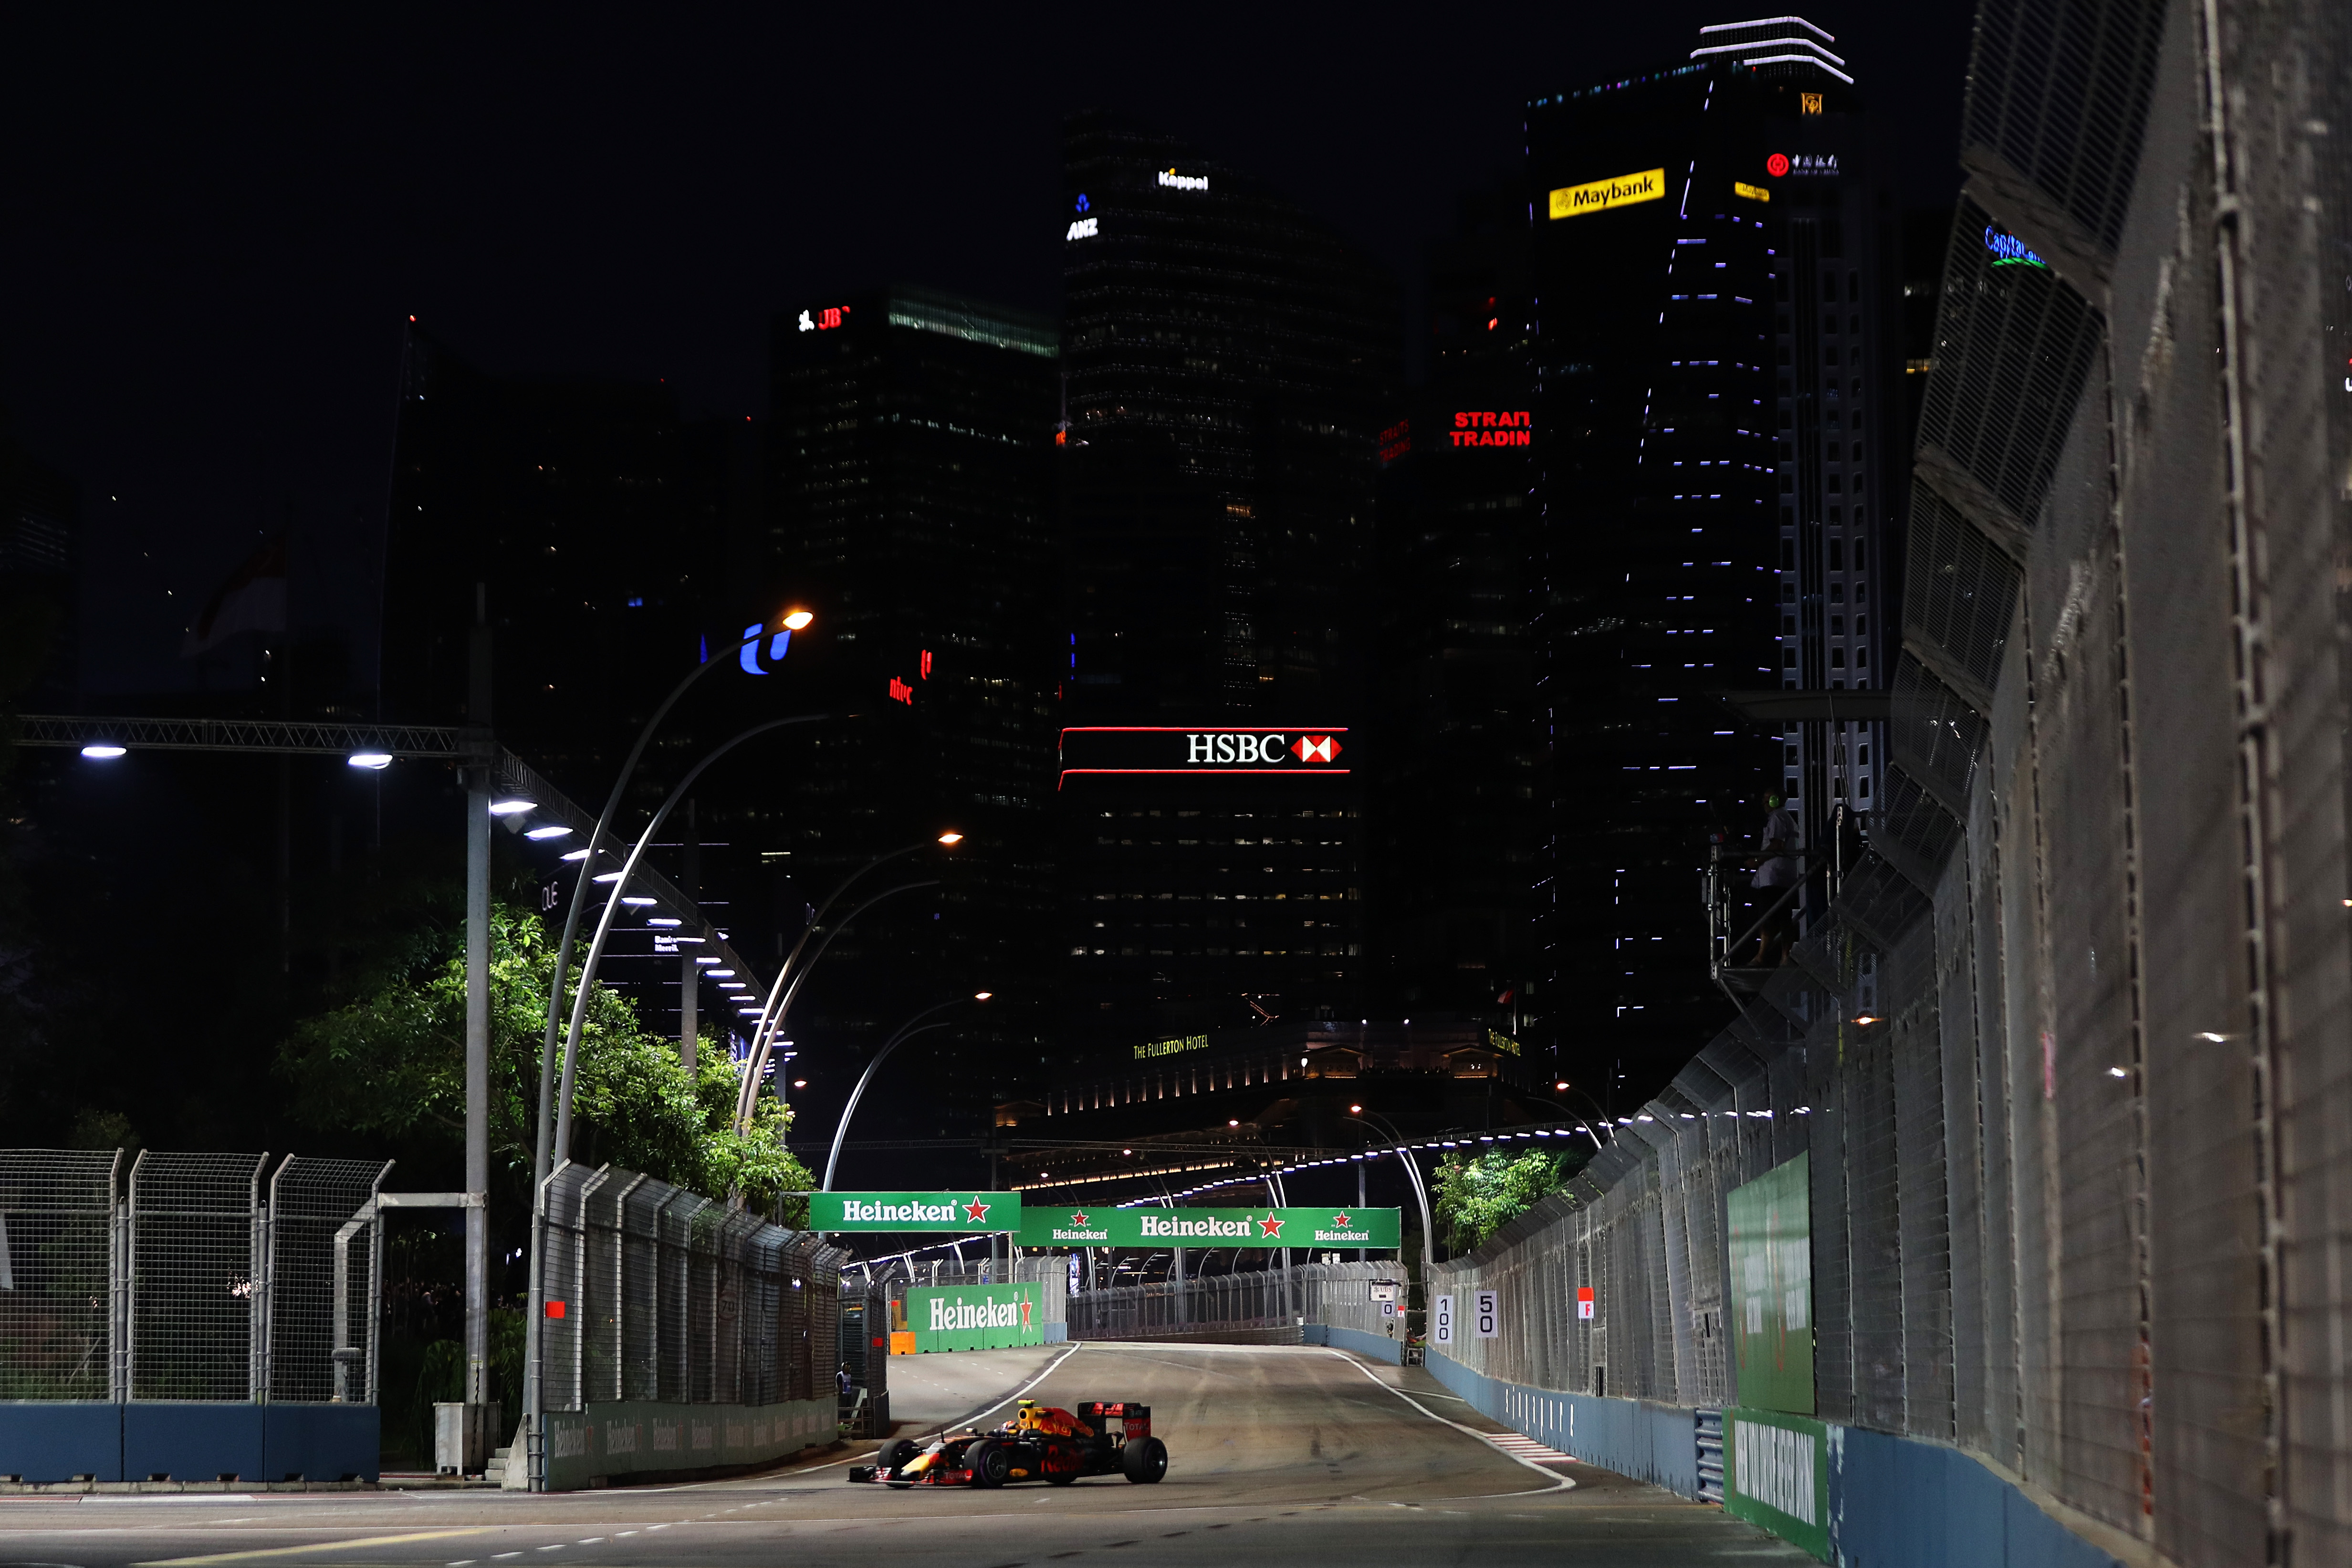 SINGAPORE - SEPTEMBER 16: Max Verstappen of the Netherlands driving the (33) Red Bull Racing Red Bull-TAG Heuer RB12 TAG Heuer on track during practice for the Formula One Grand Prix of Singapore at Marina Bay Street Circuit on September 16, 2016 in Singapore.  (Photo by Mark Thompson/Getty Images)